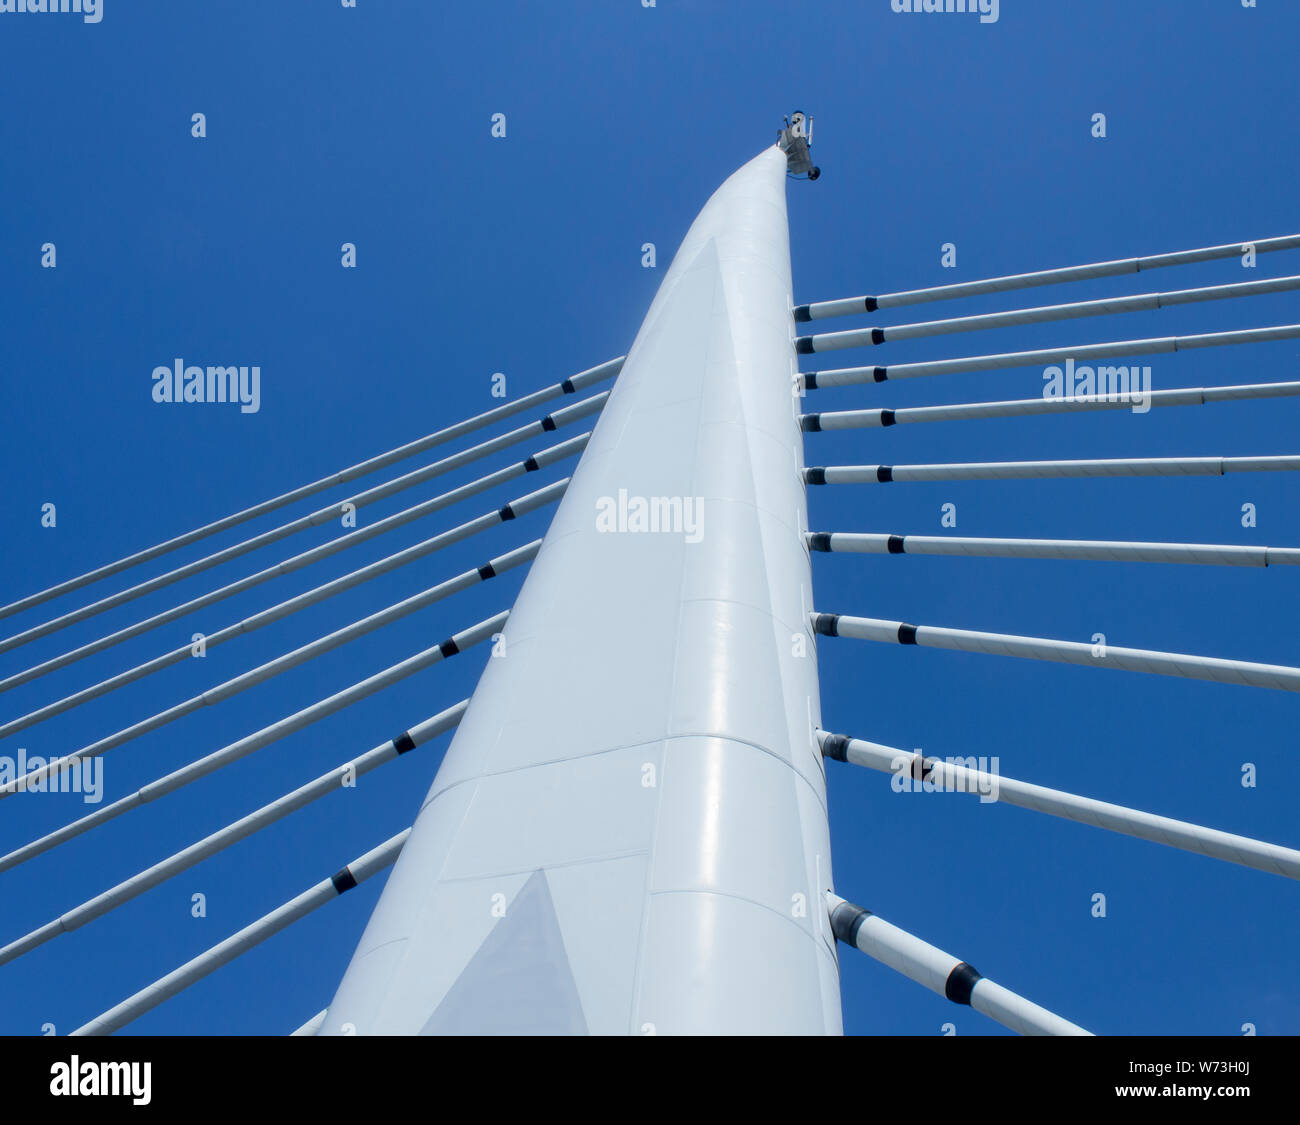 Modern suspension bridge tower and mutliple symmetrical suspension cables connected to the foot in low angle view image. Cables are covered with spira Stock Photo